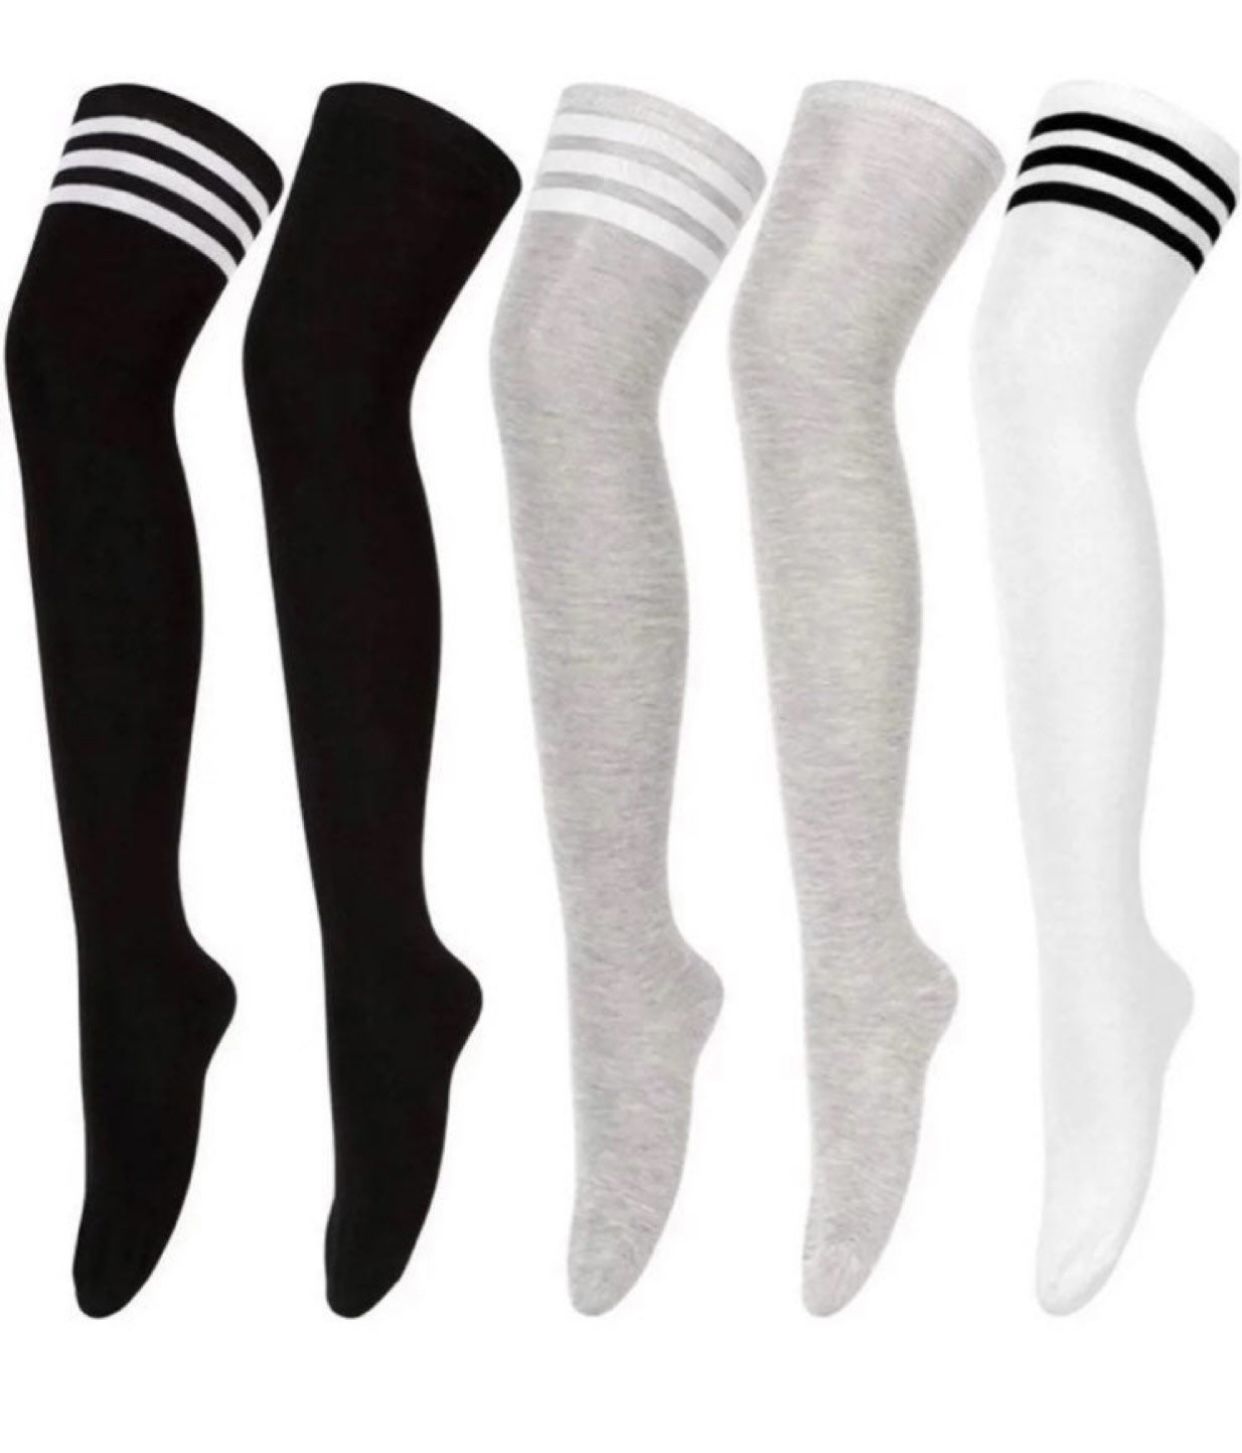 (5 pairs) Womens Thigh High Socks Over the Knee High Striped Stocking Boot Leg 